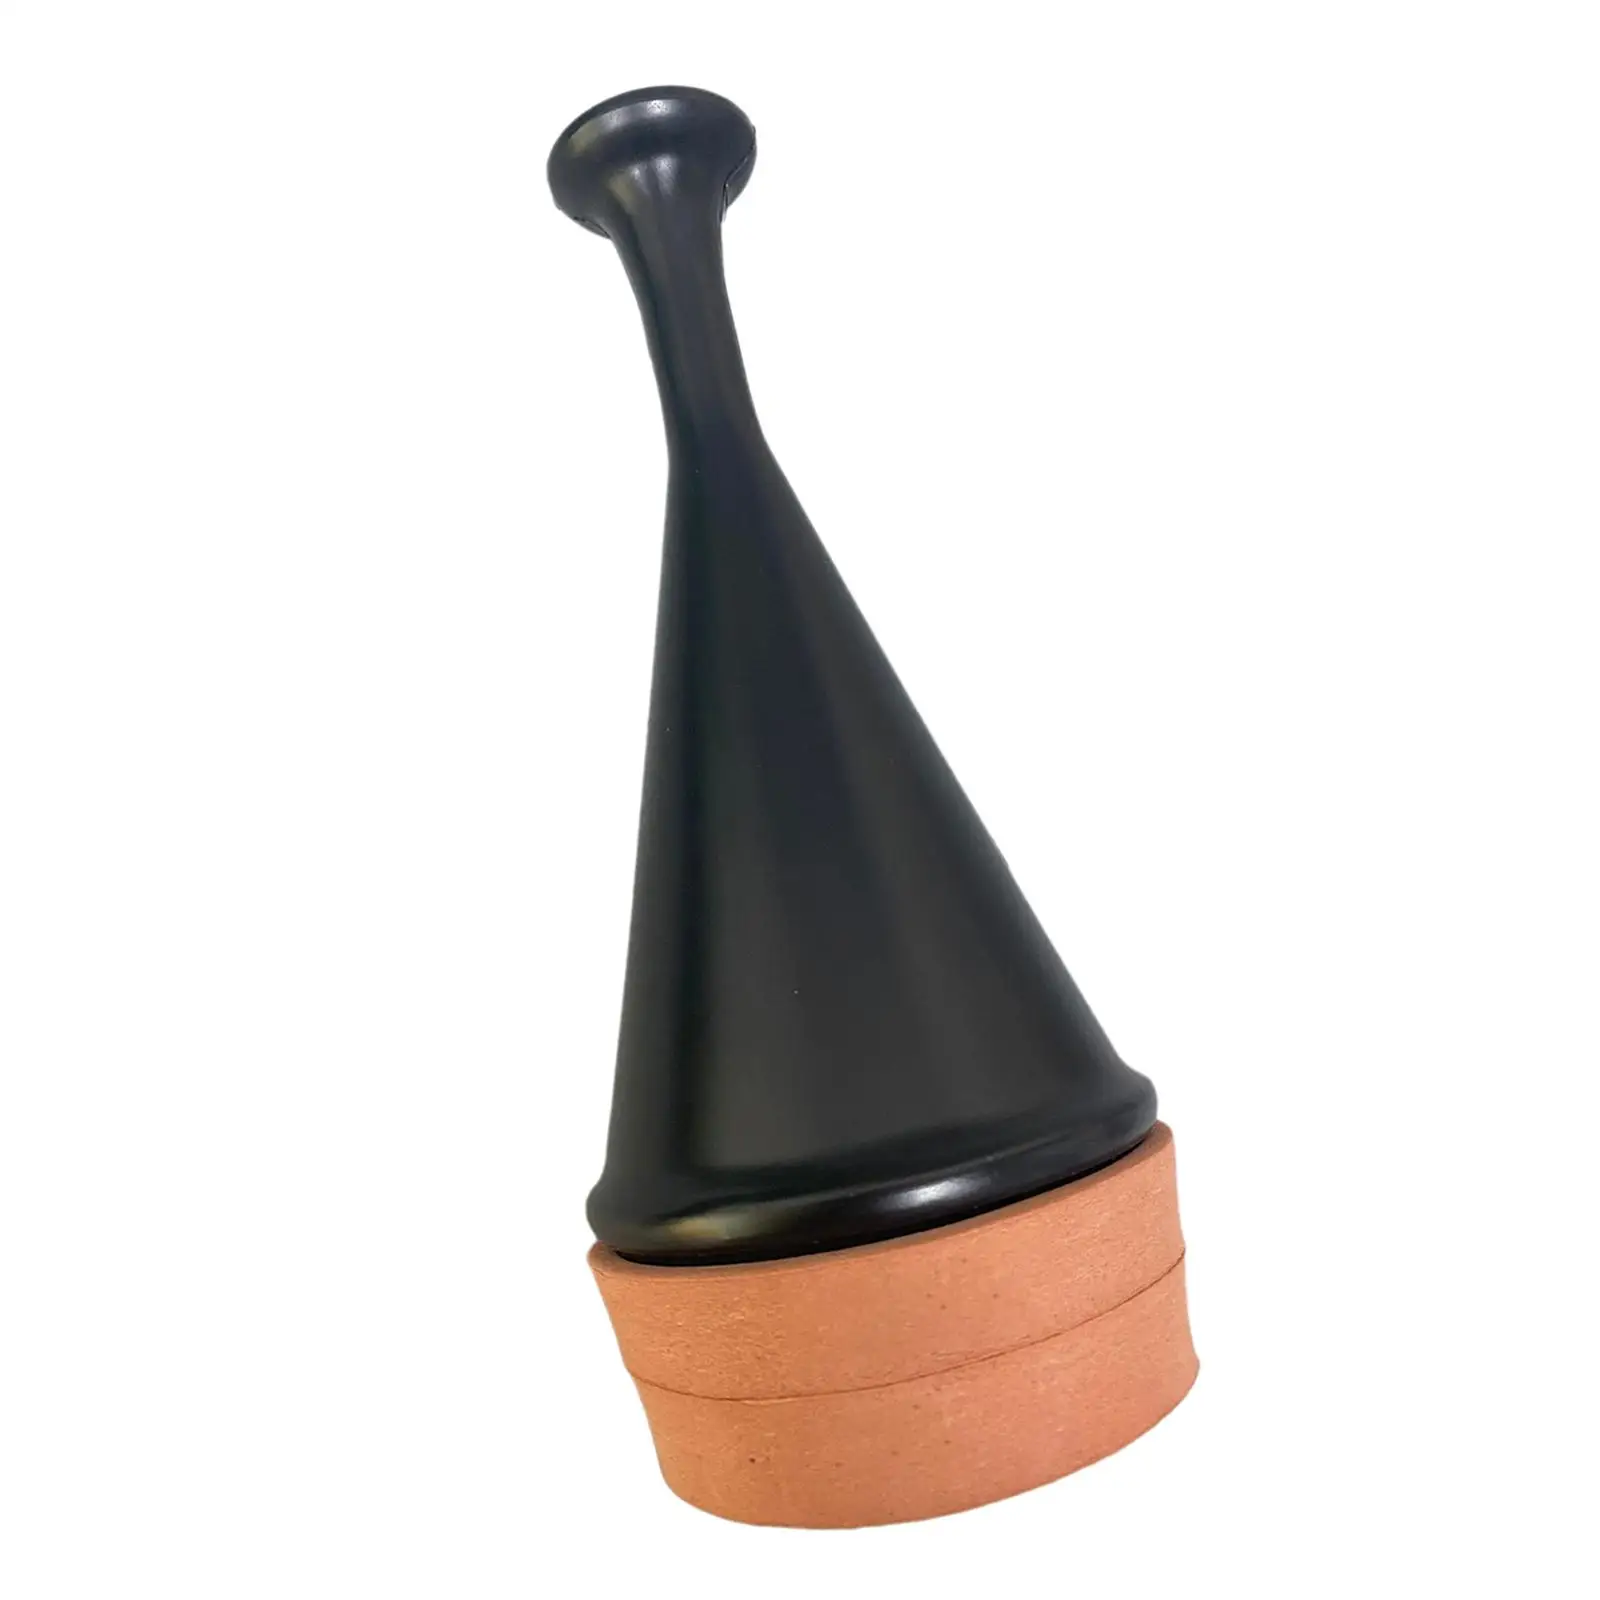 French Horn Practice Mute Musical Instrument Accessory Mute for Practicing